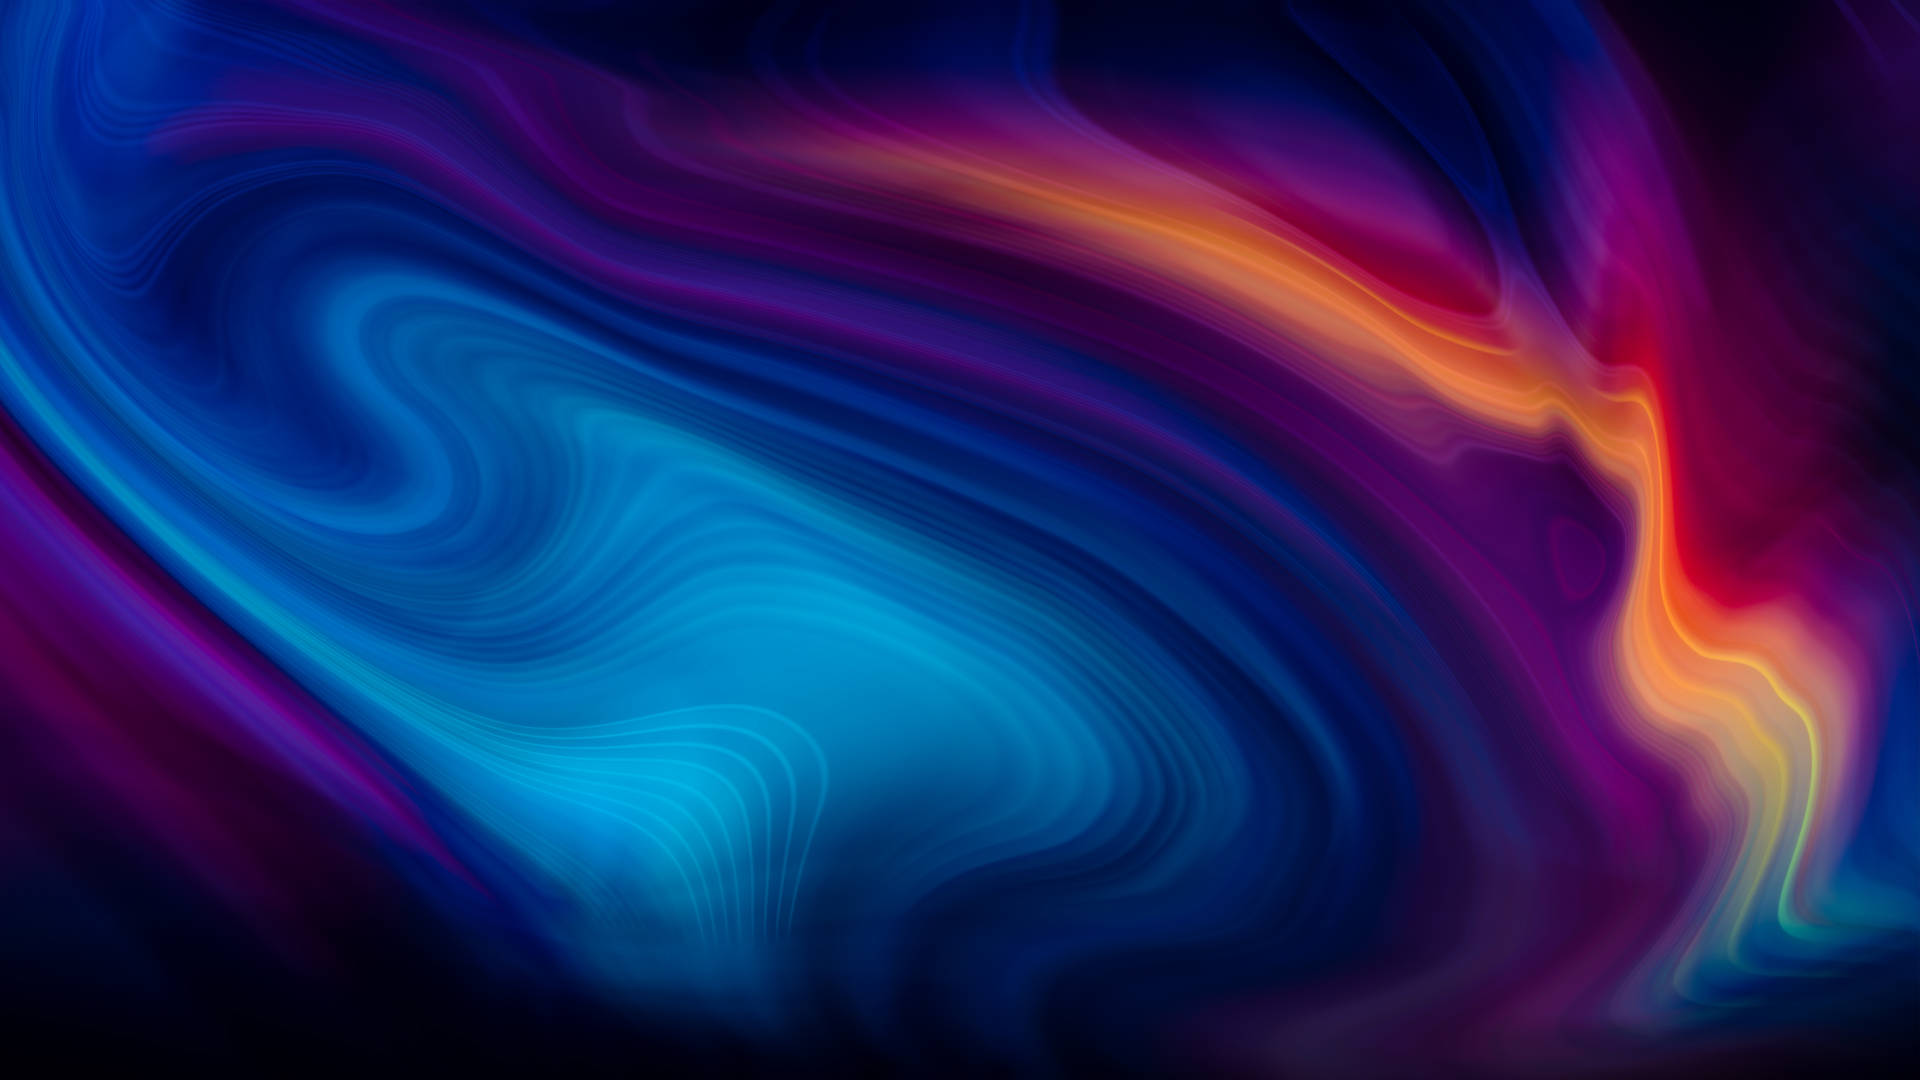 Free Abstract Wallpaper Downloads, [1500+] Abstract Wallpapers for FREE |  